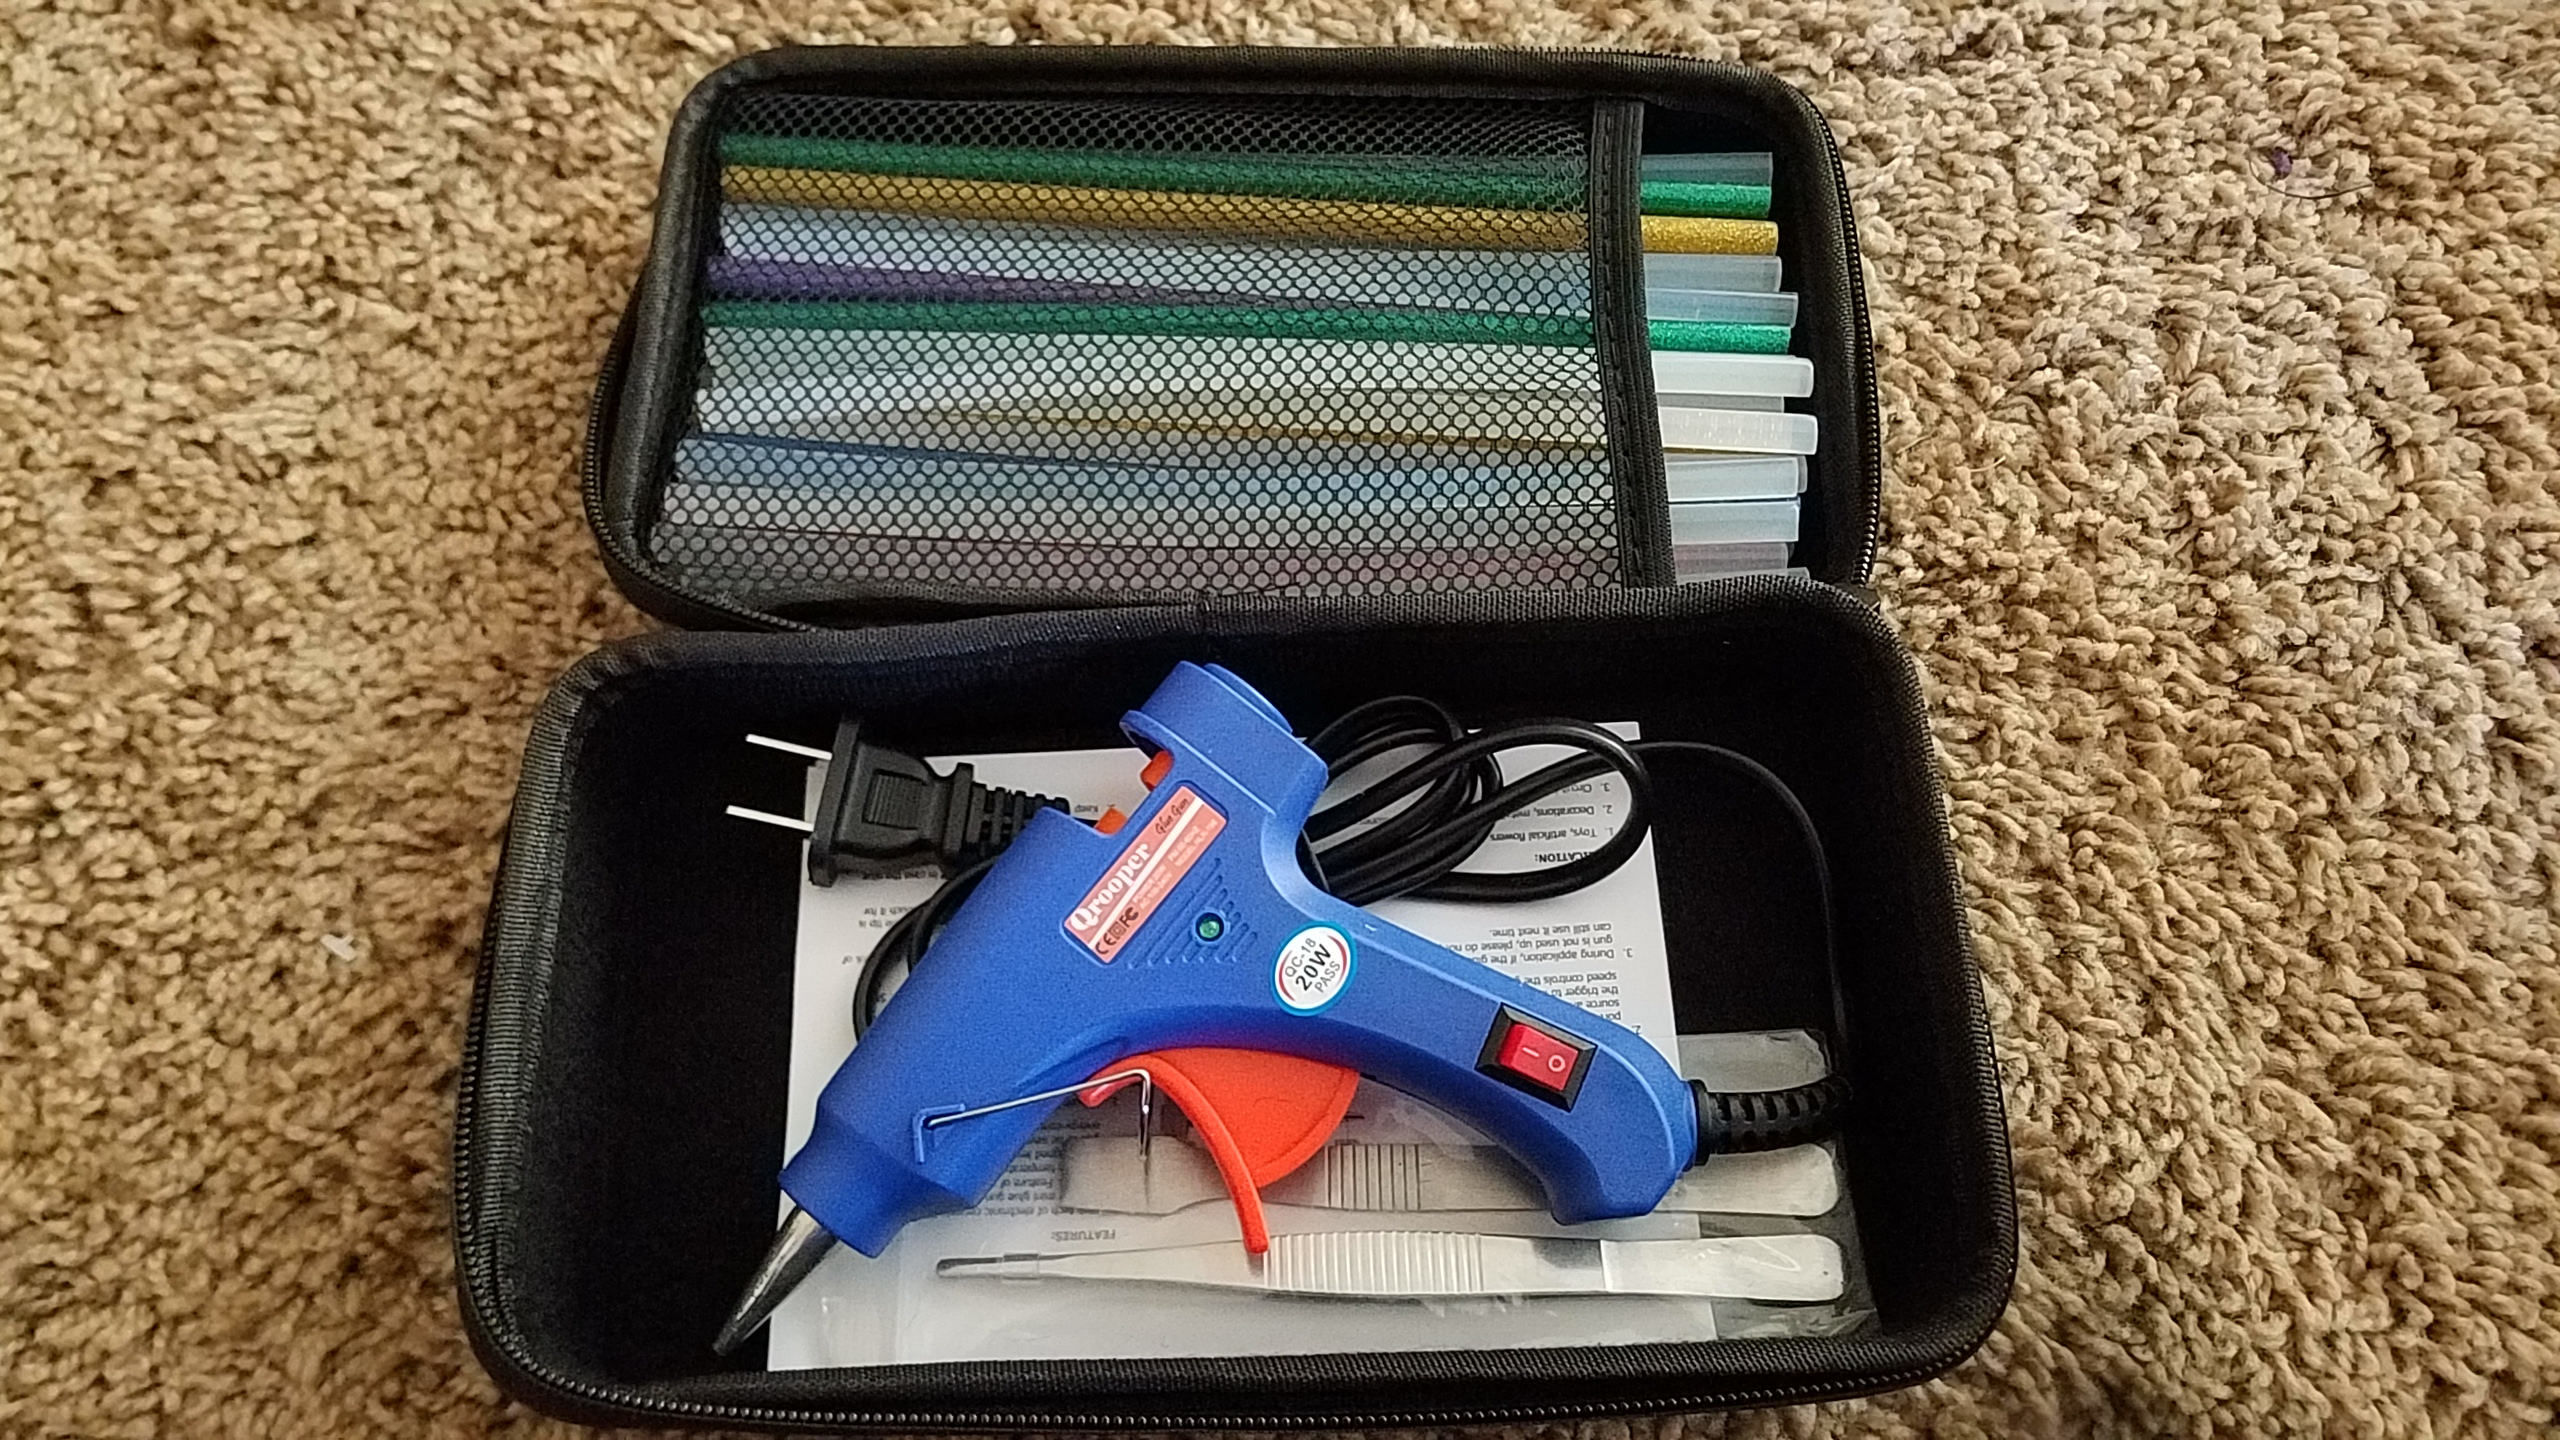 Excellent small hot glue gun for the hobbyist and professional as well.